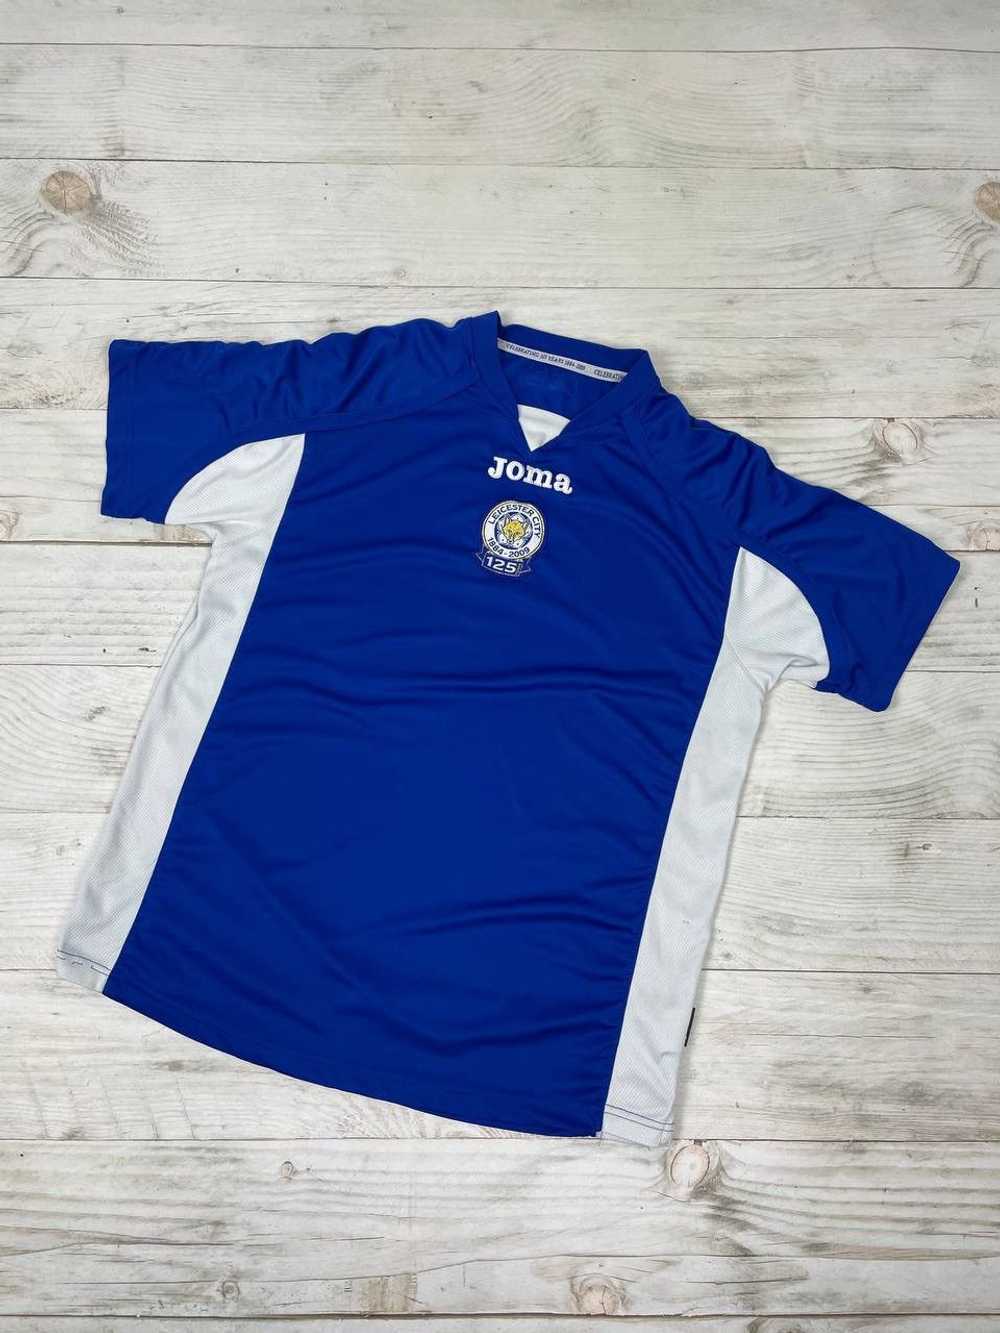 Joma × Soccer Jersey × Vintage Joma LEICESTER CIT… - image 1